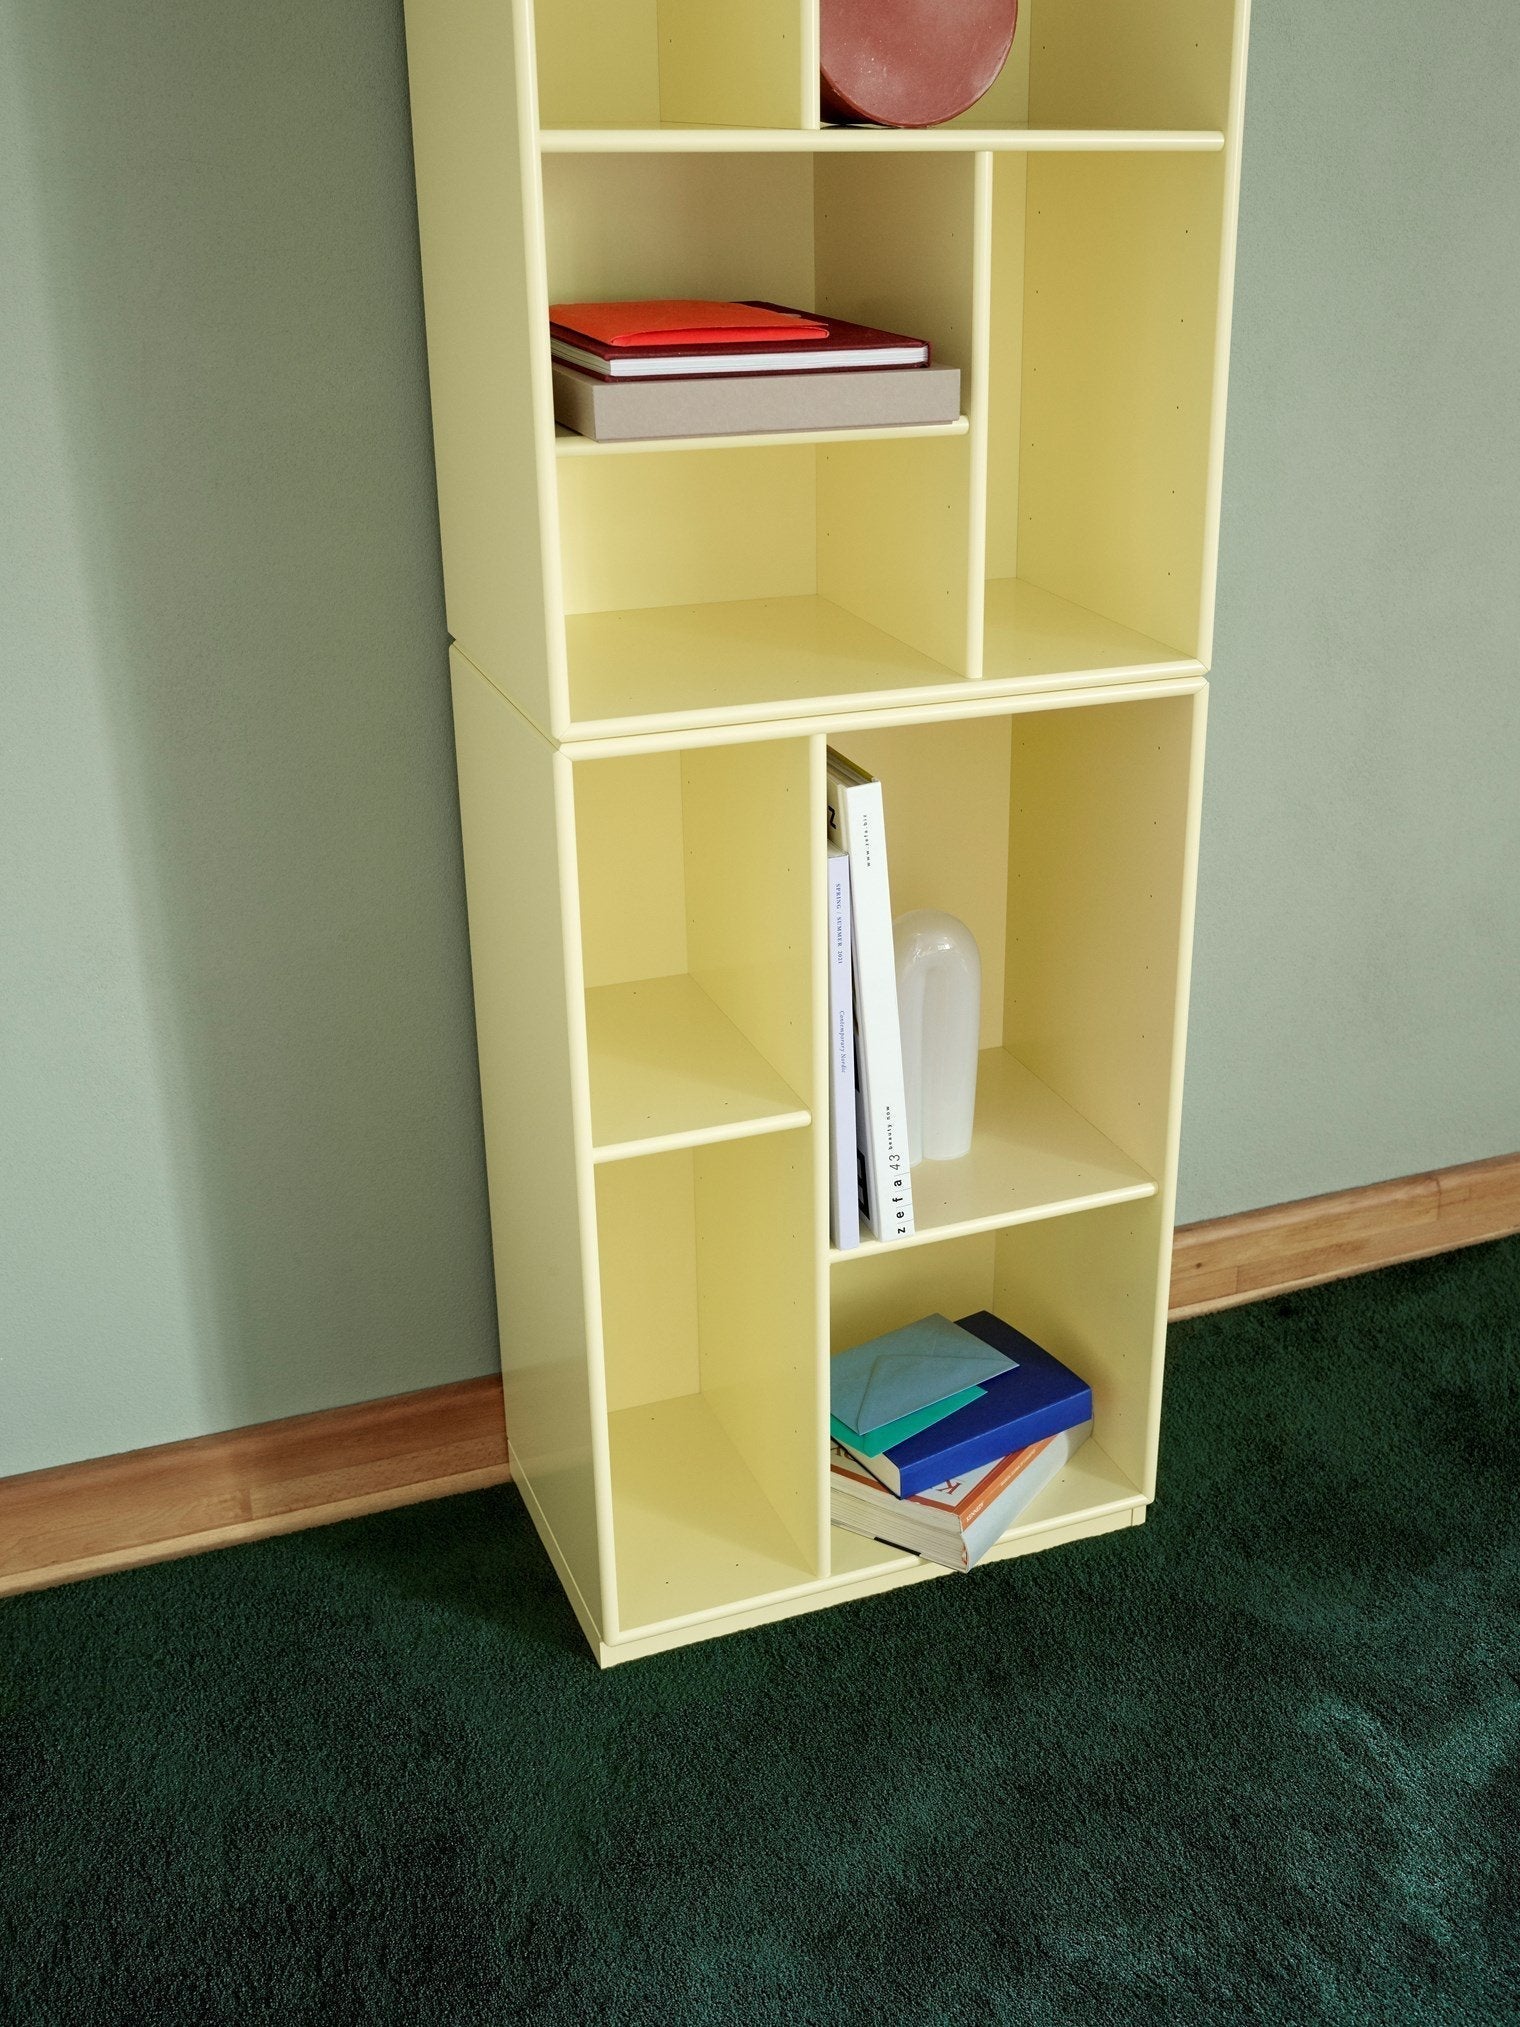 Montana Loom High Bookcase With 3 Cm Plinth, Oat